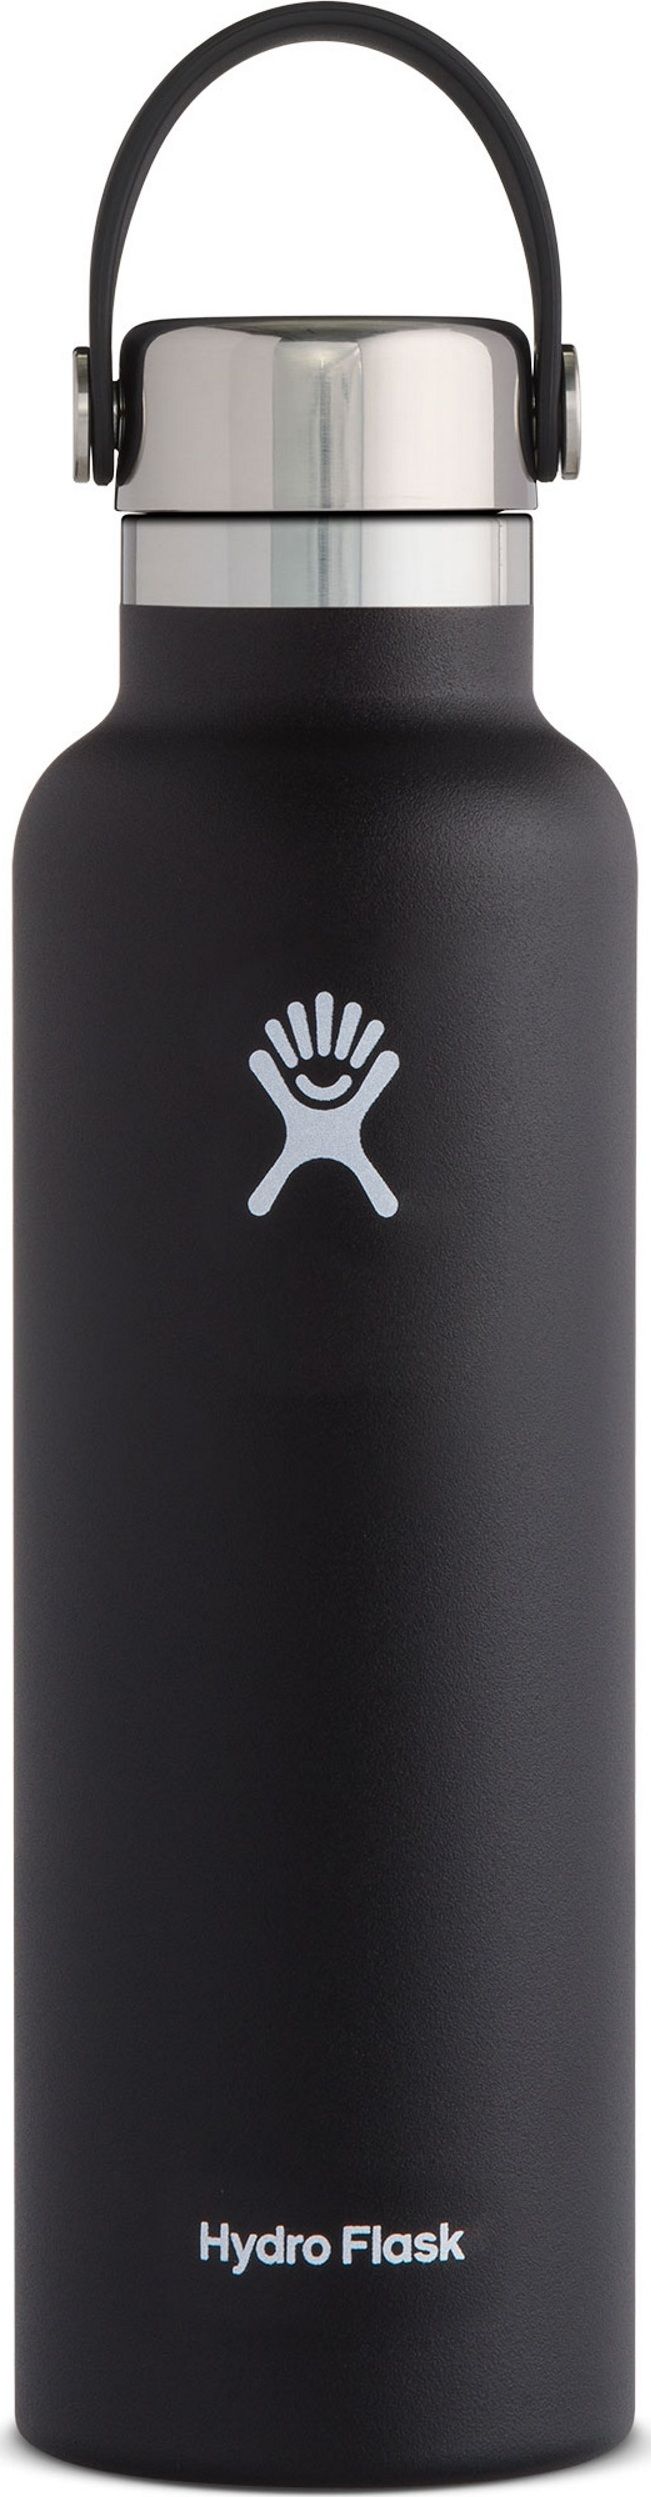 Standard Mouth Stainless Steel Cap 621 ml BLACK Hydro Flask